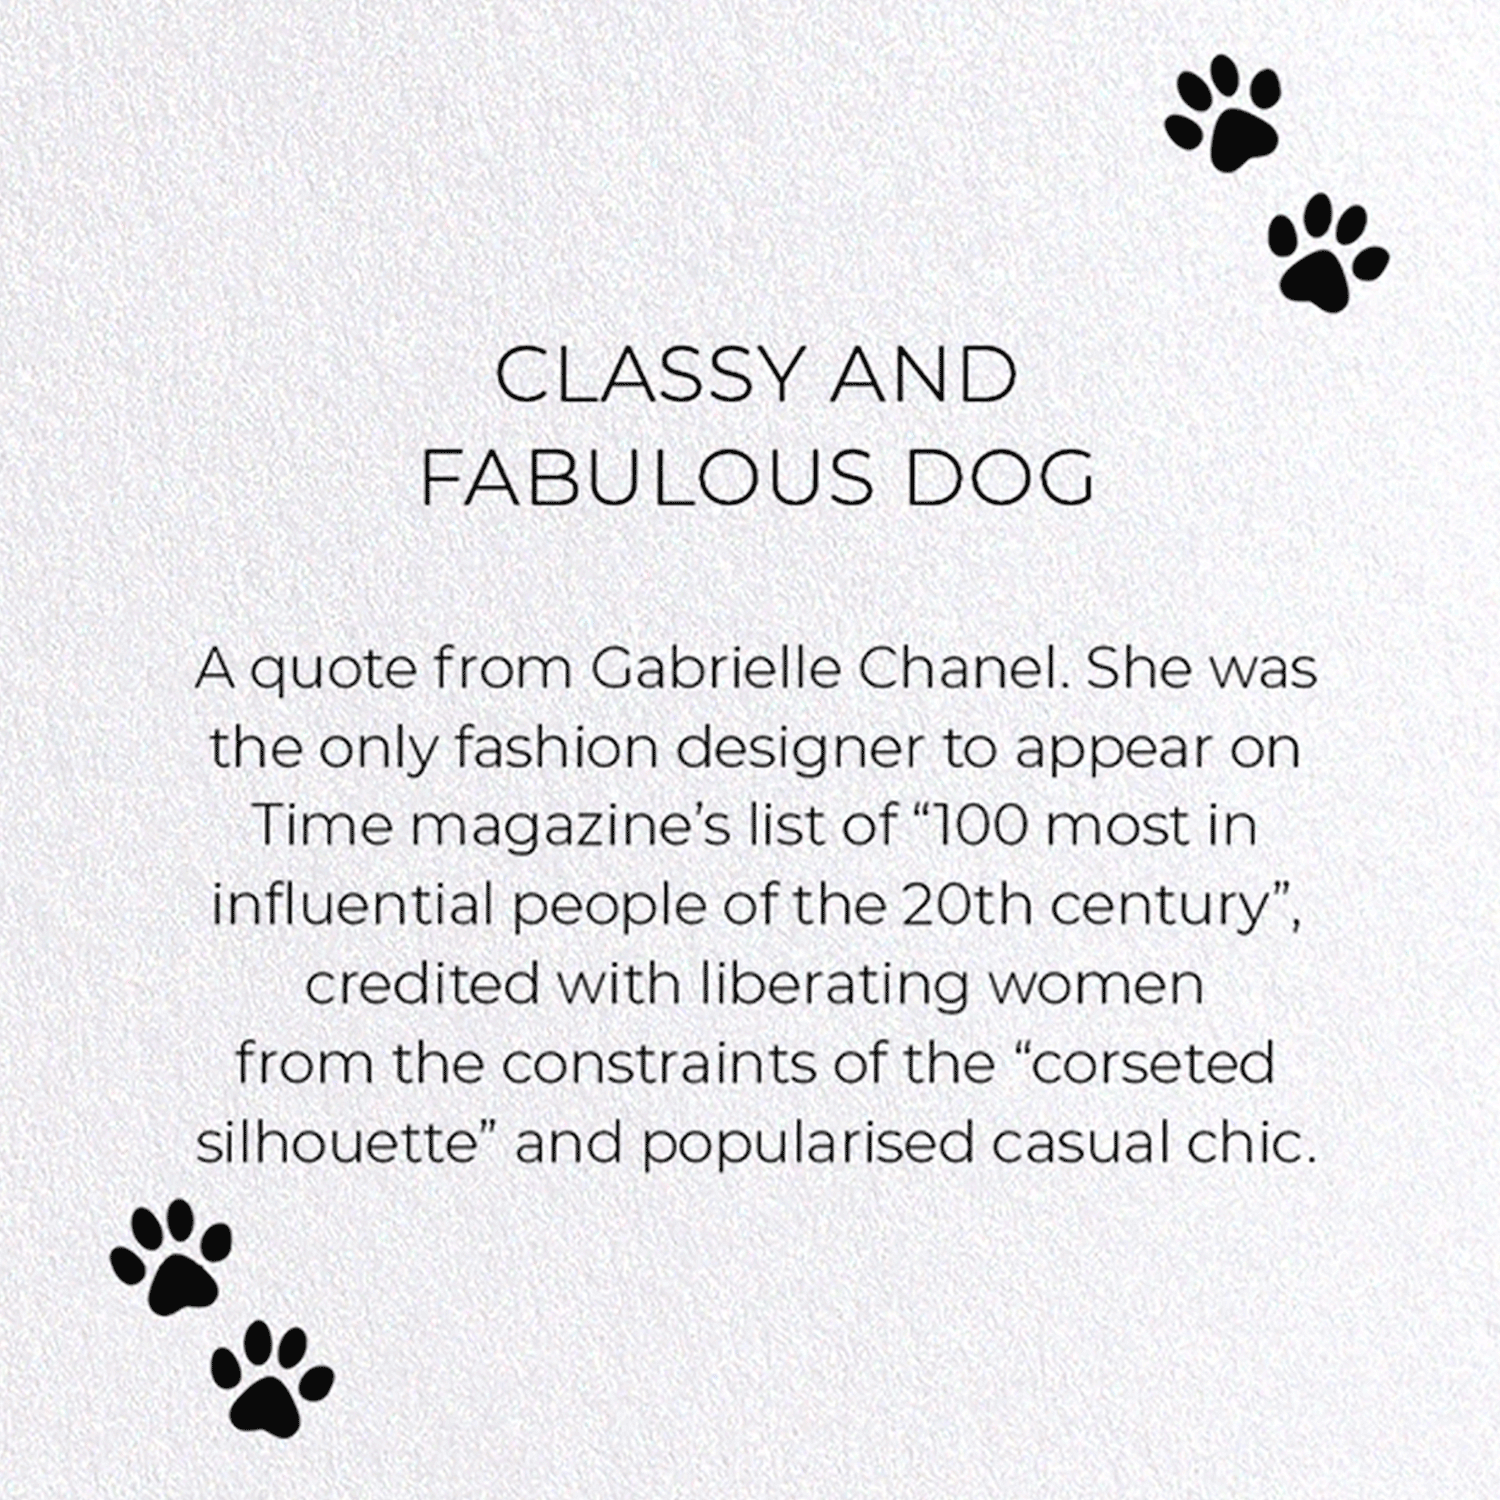 CLASSY AND FABULOUS DOG: Funny Animal Greeting Card